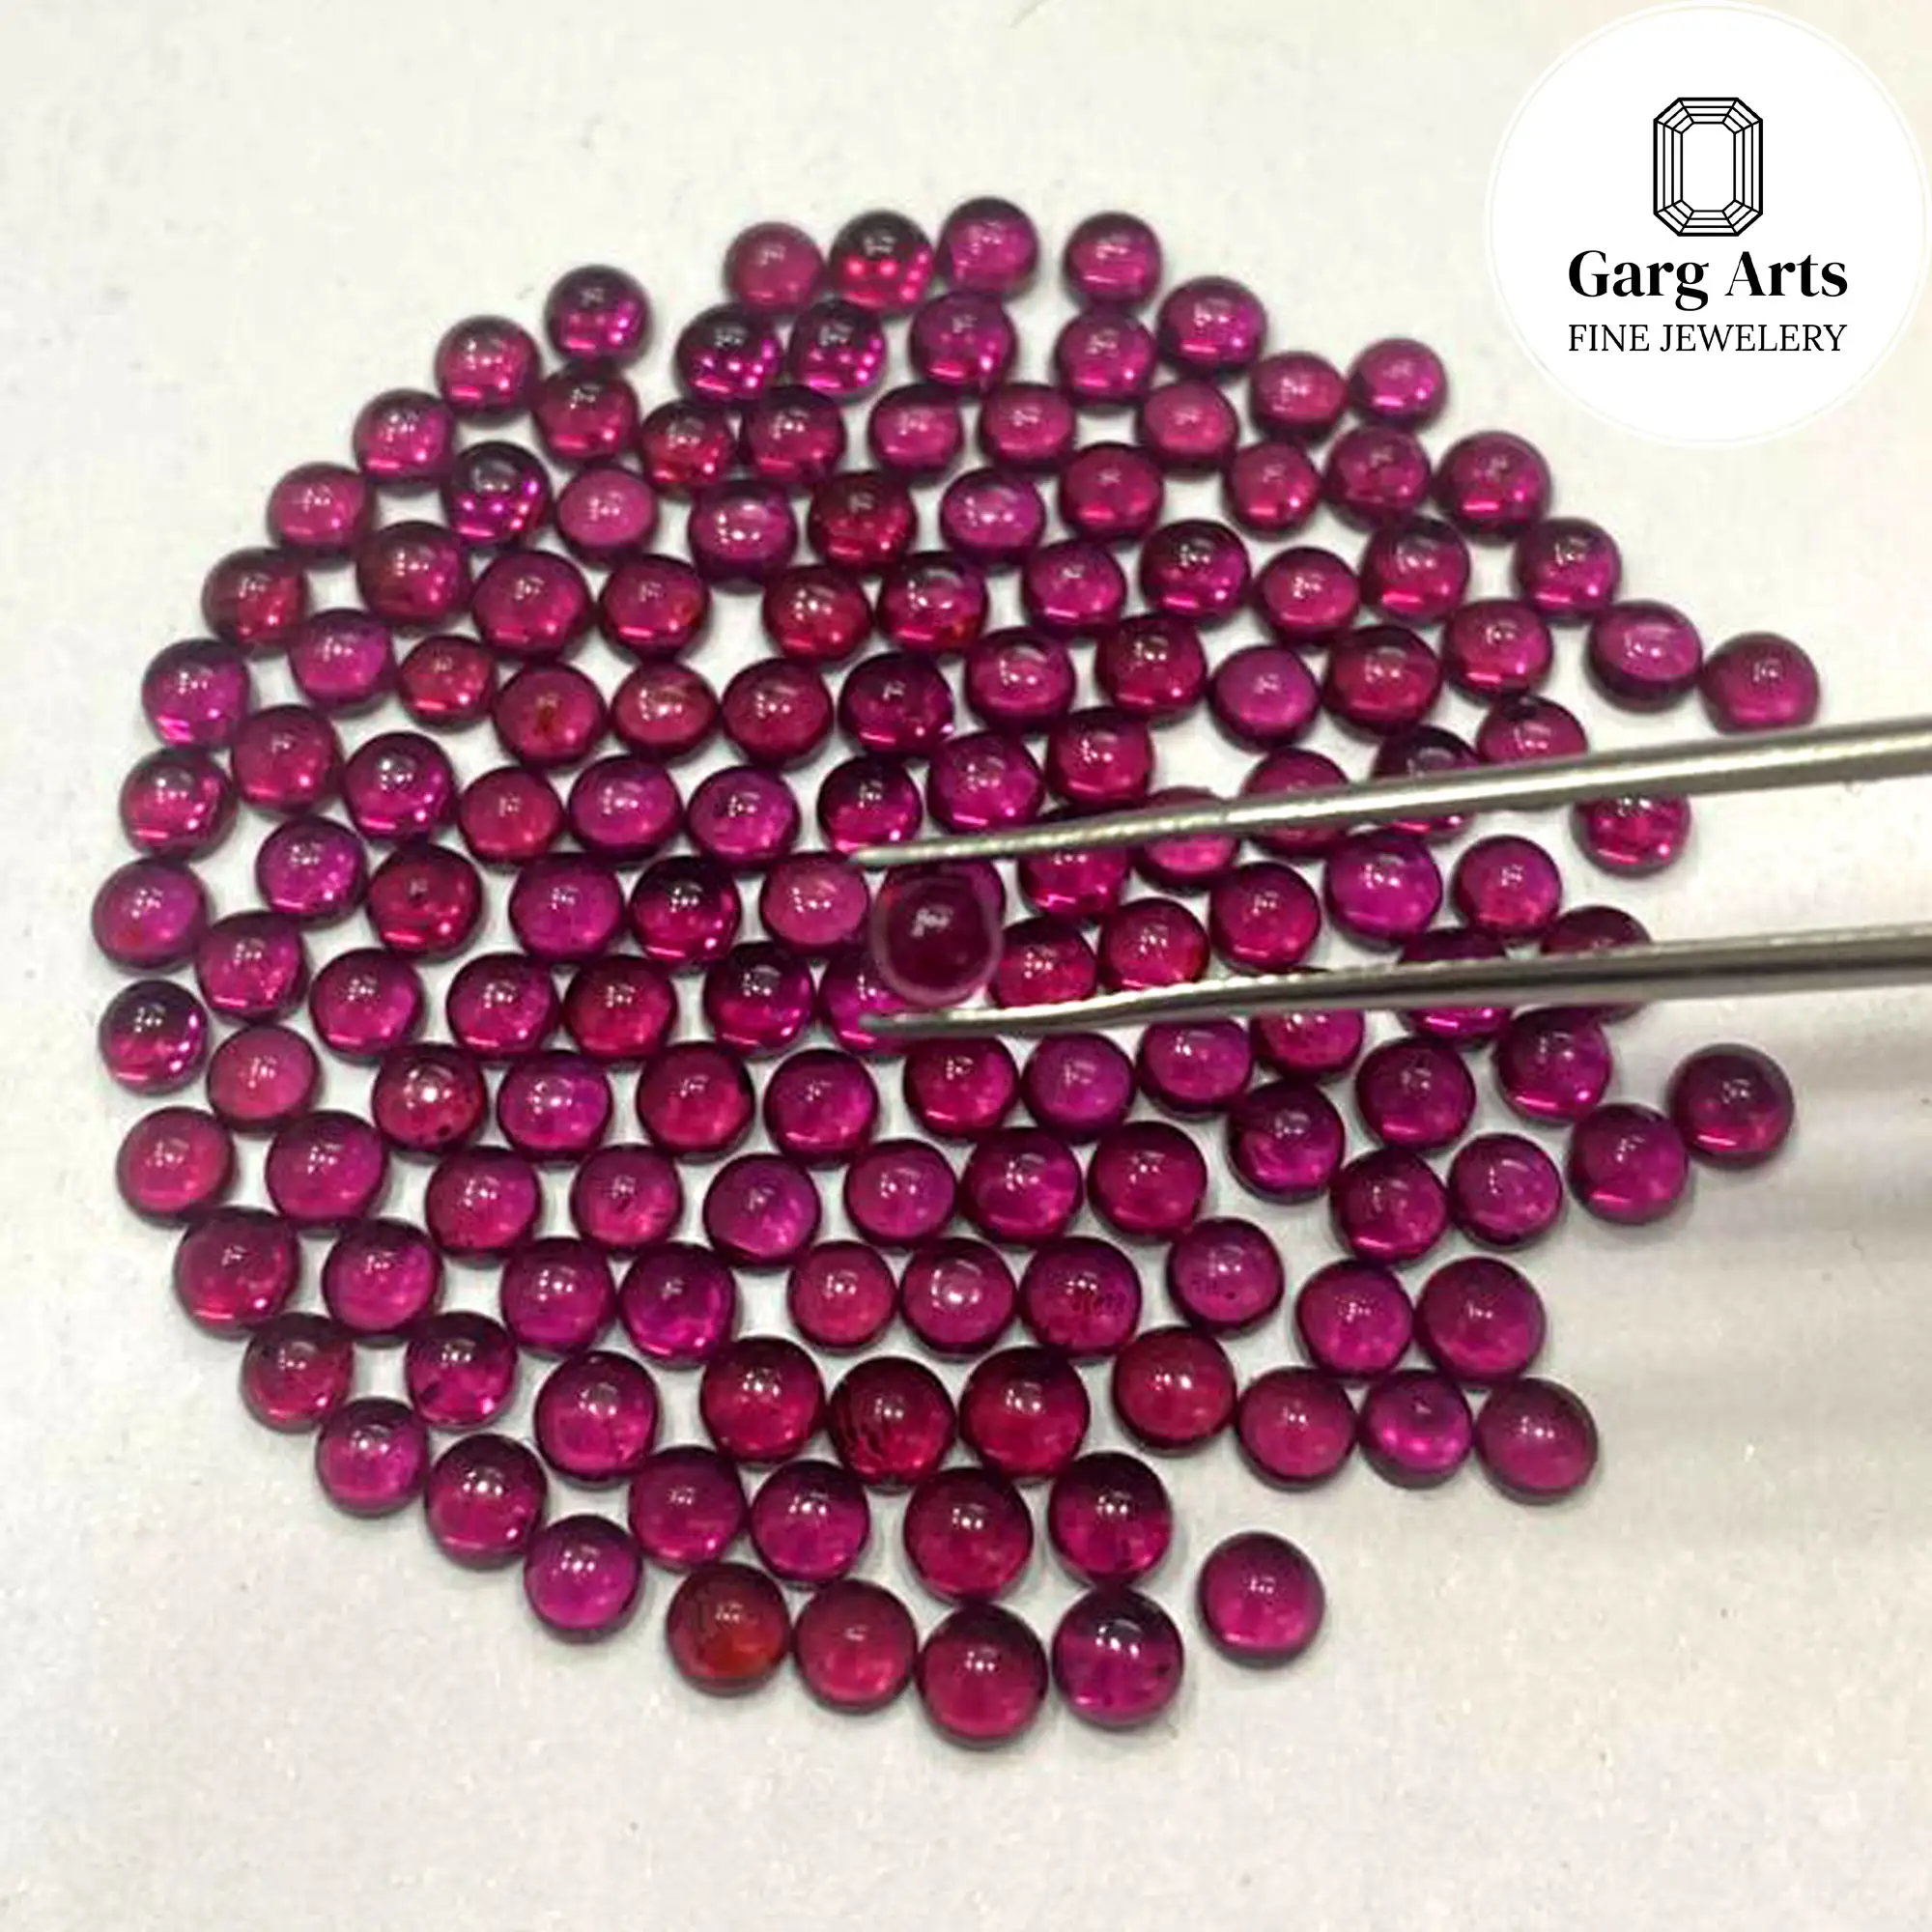 Top Quality 3x3 mm Round Calibration Pink and Deep Red Loose Natural Garnet Cabochon Gemstone